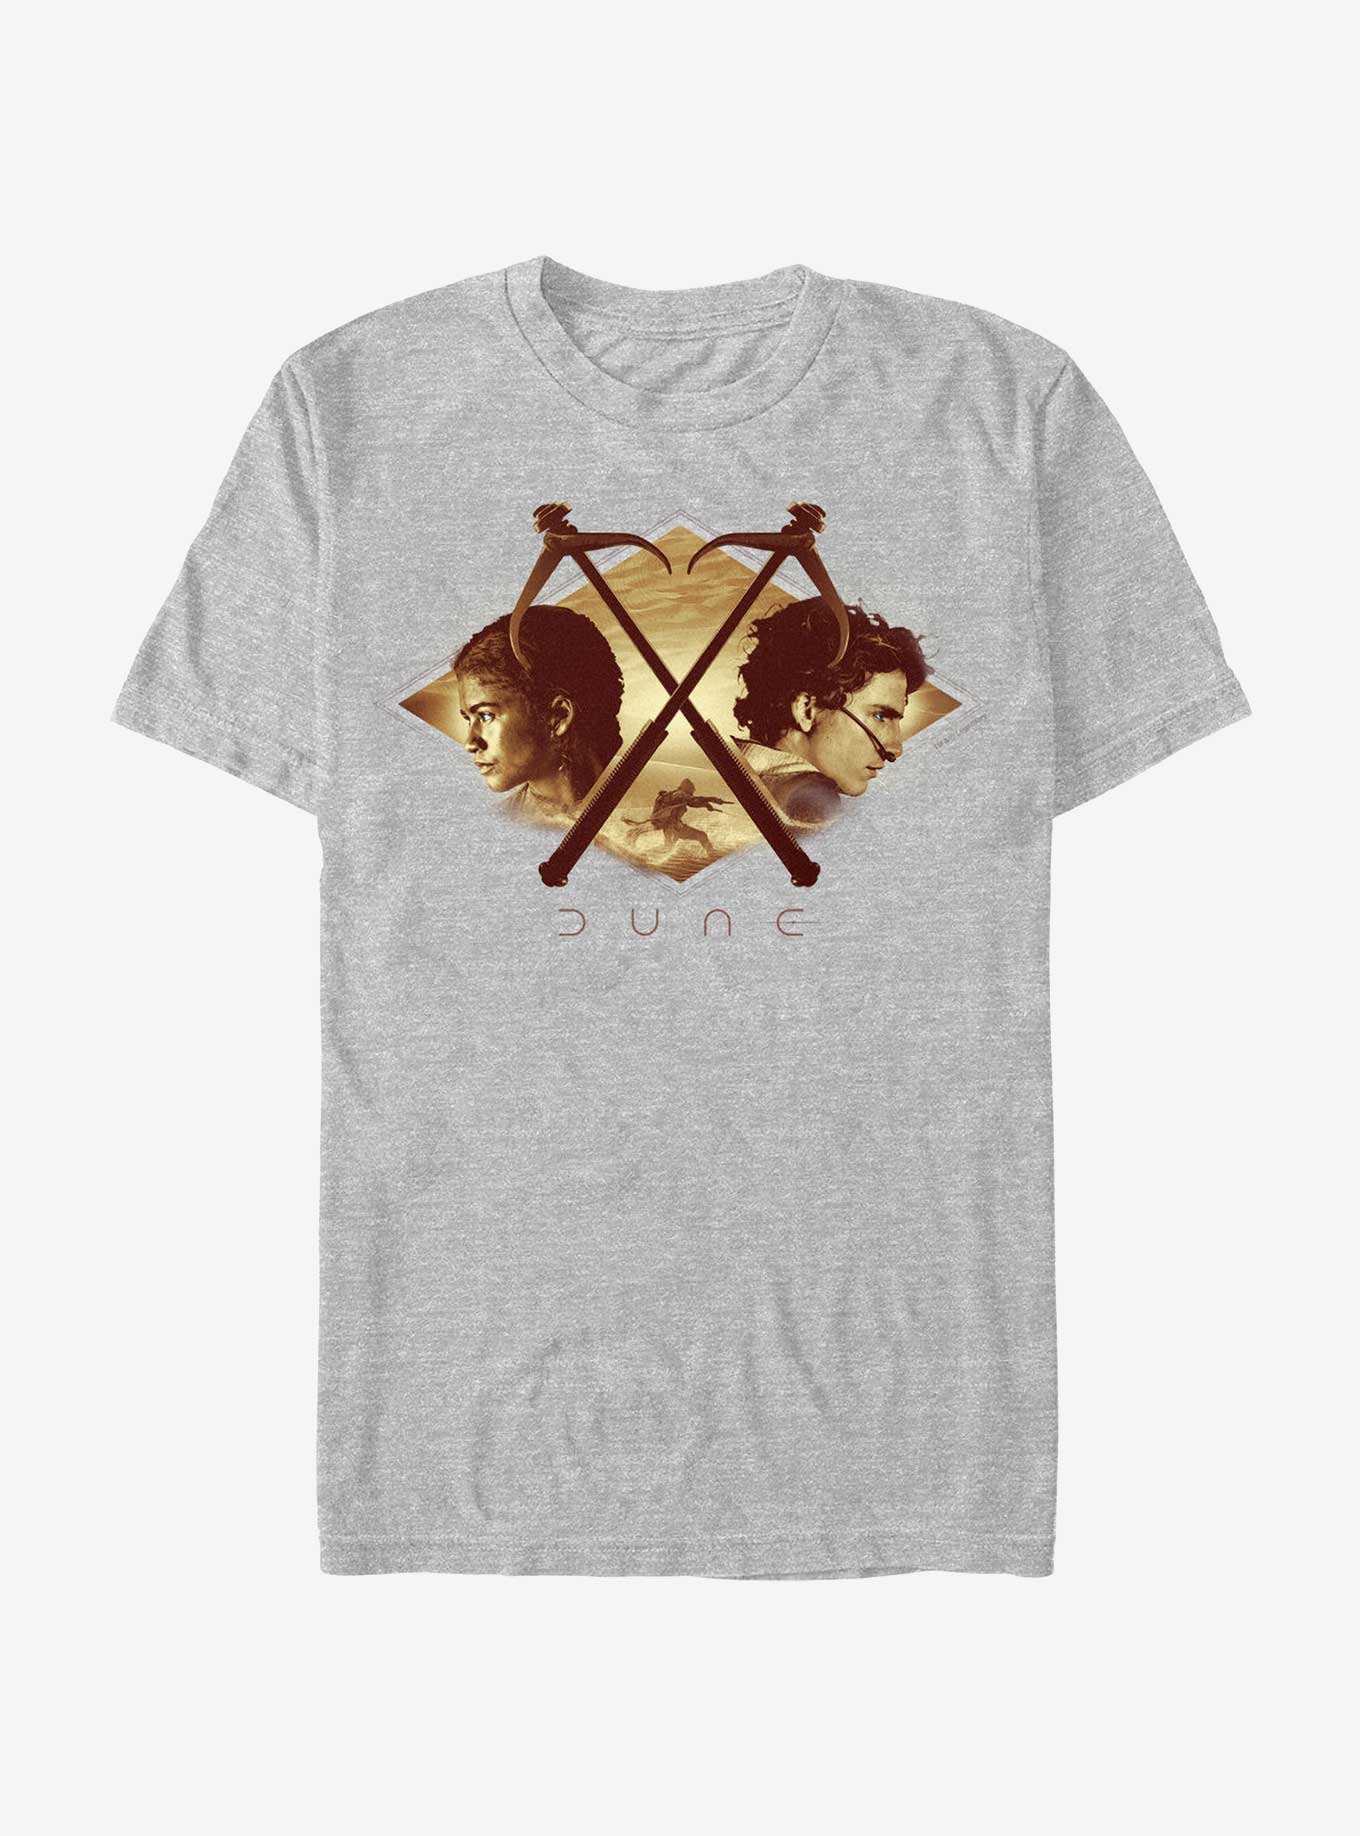 Dune: Part Two Sand Riders Chani And Paul T-Shirt, , hi-res